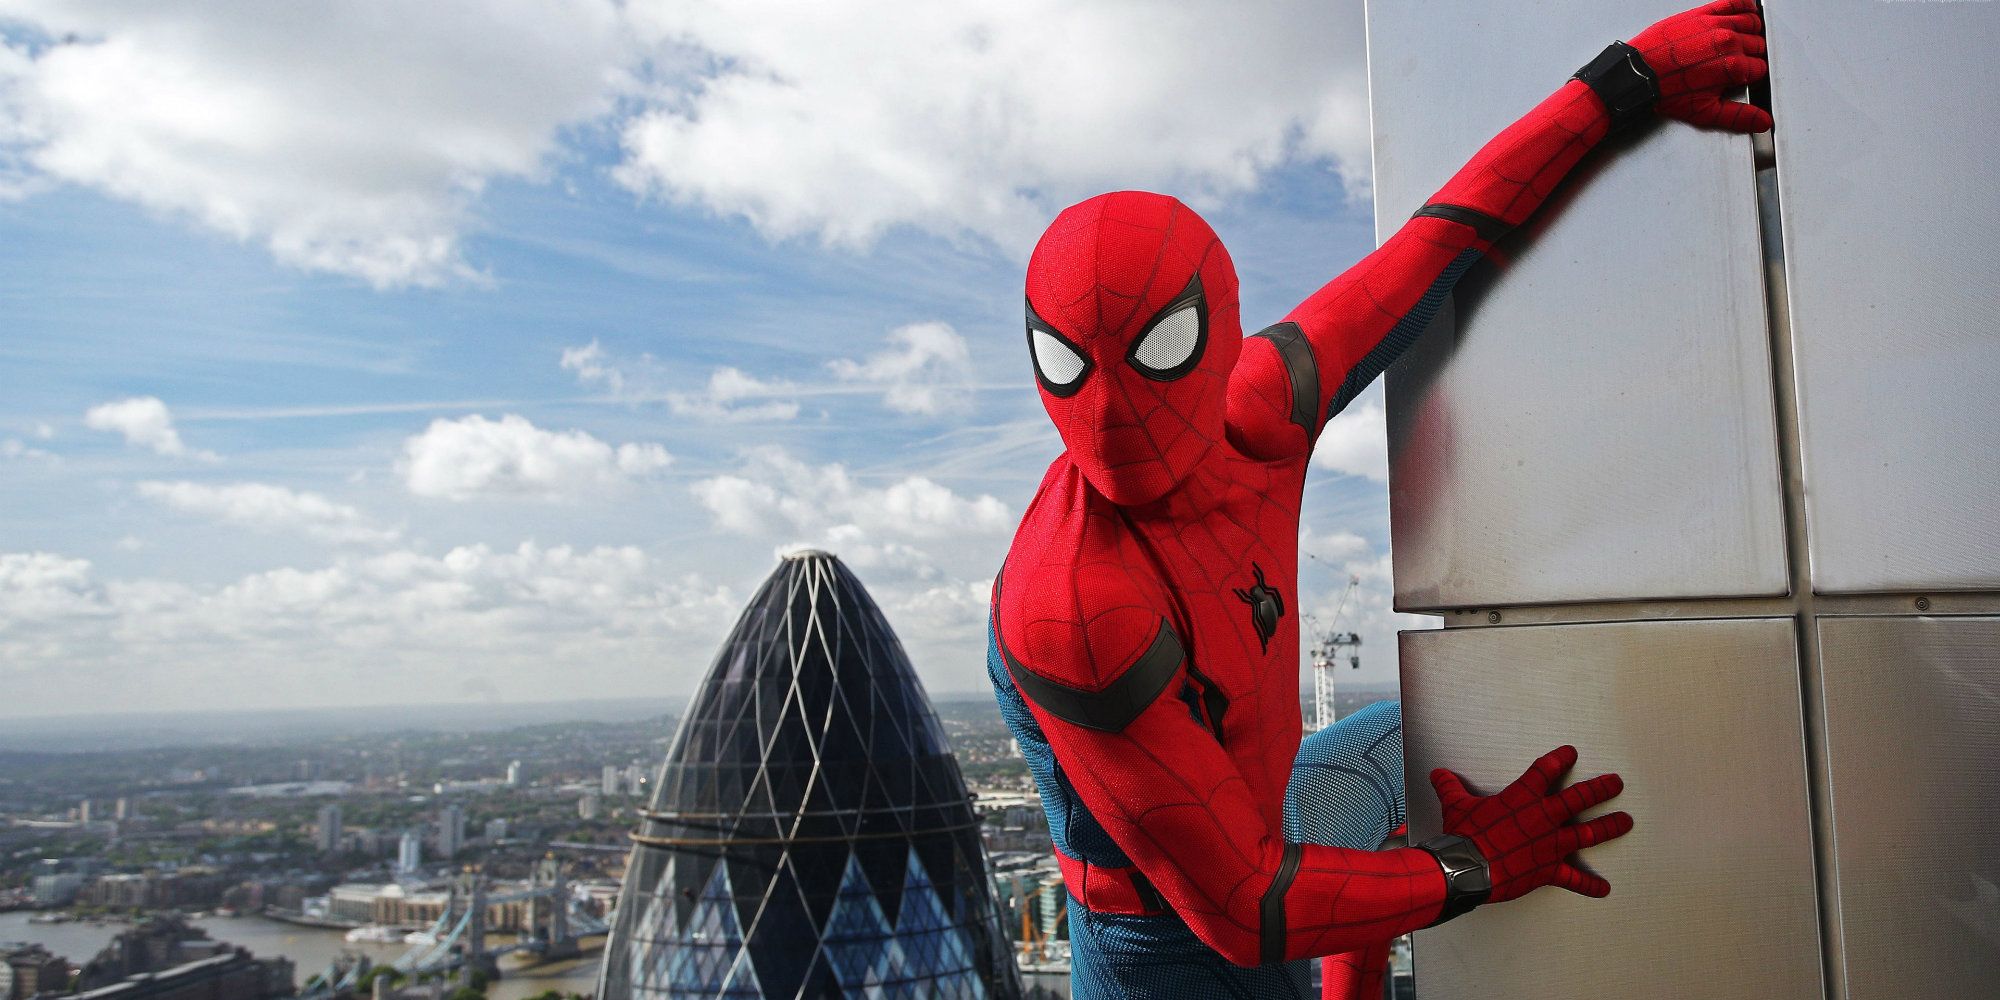 An image of Spider-Man climbing a building in Spider-Man: Homecoming